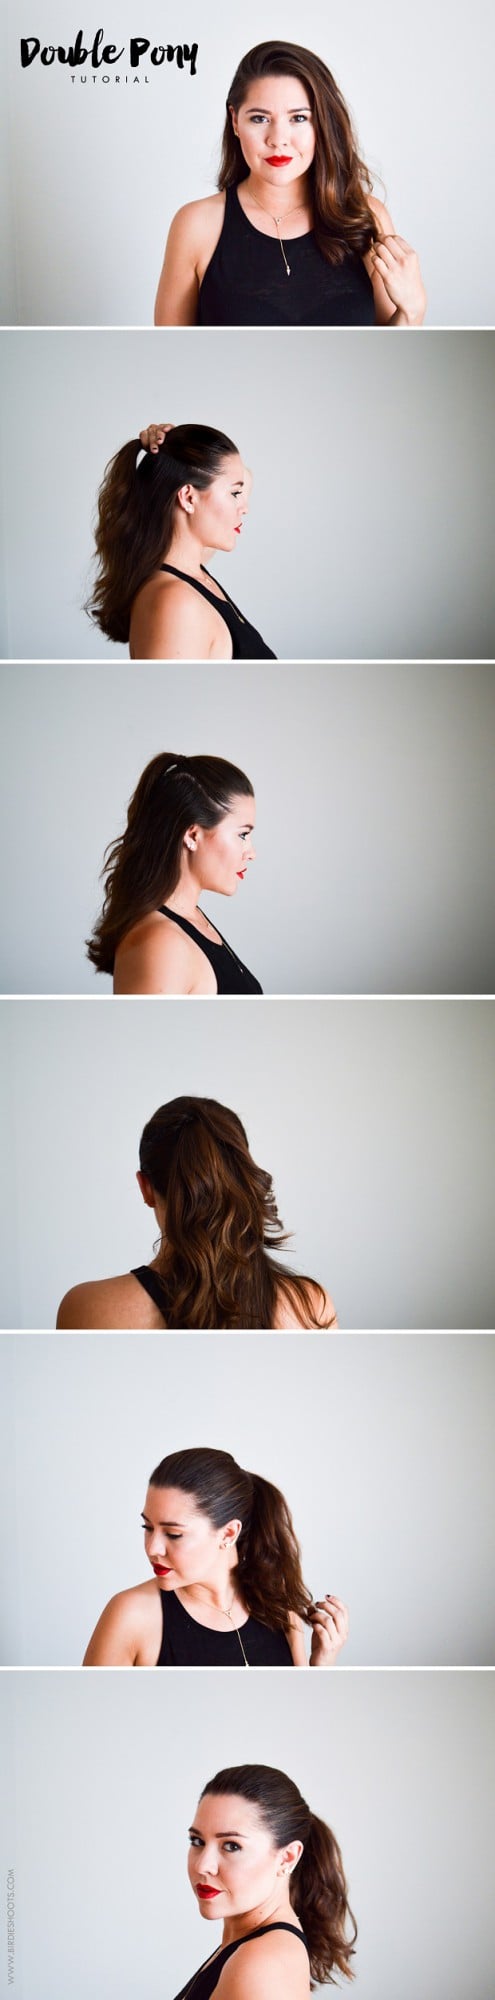 hairstyles (8)